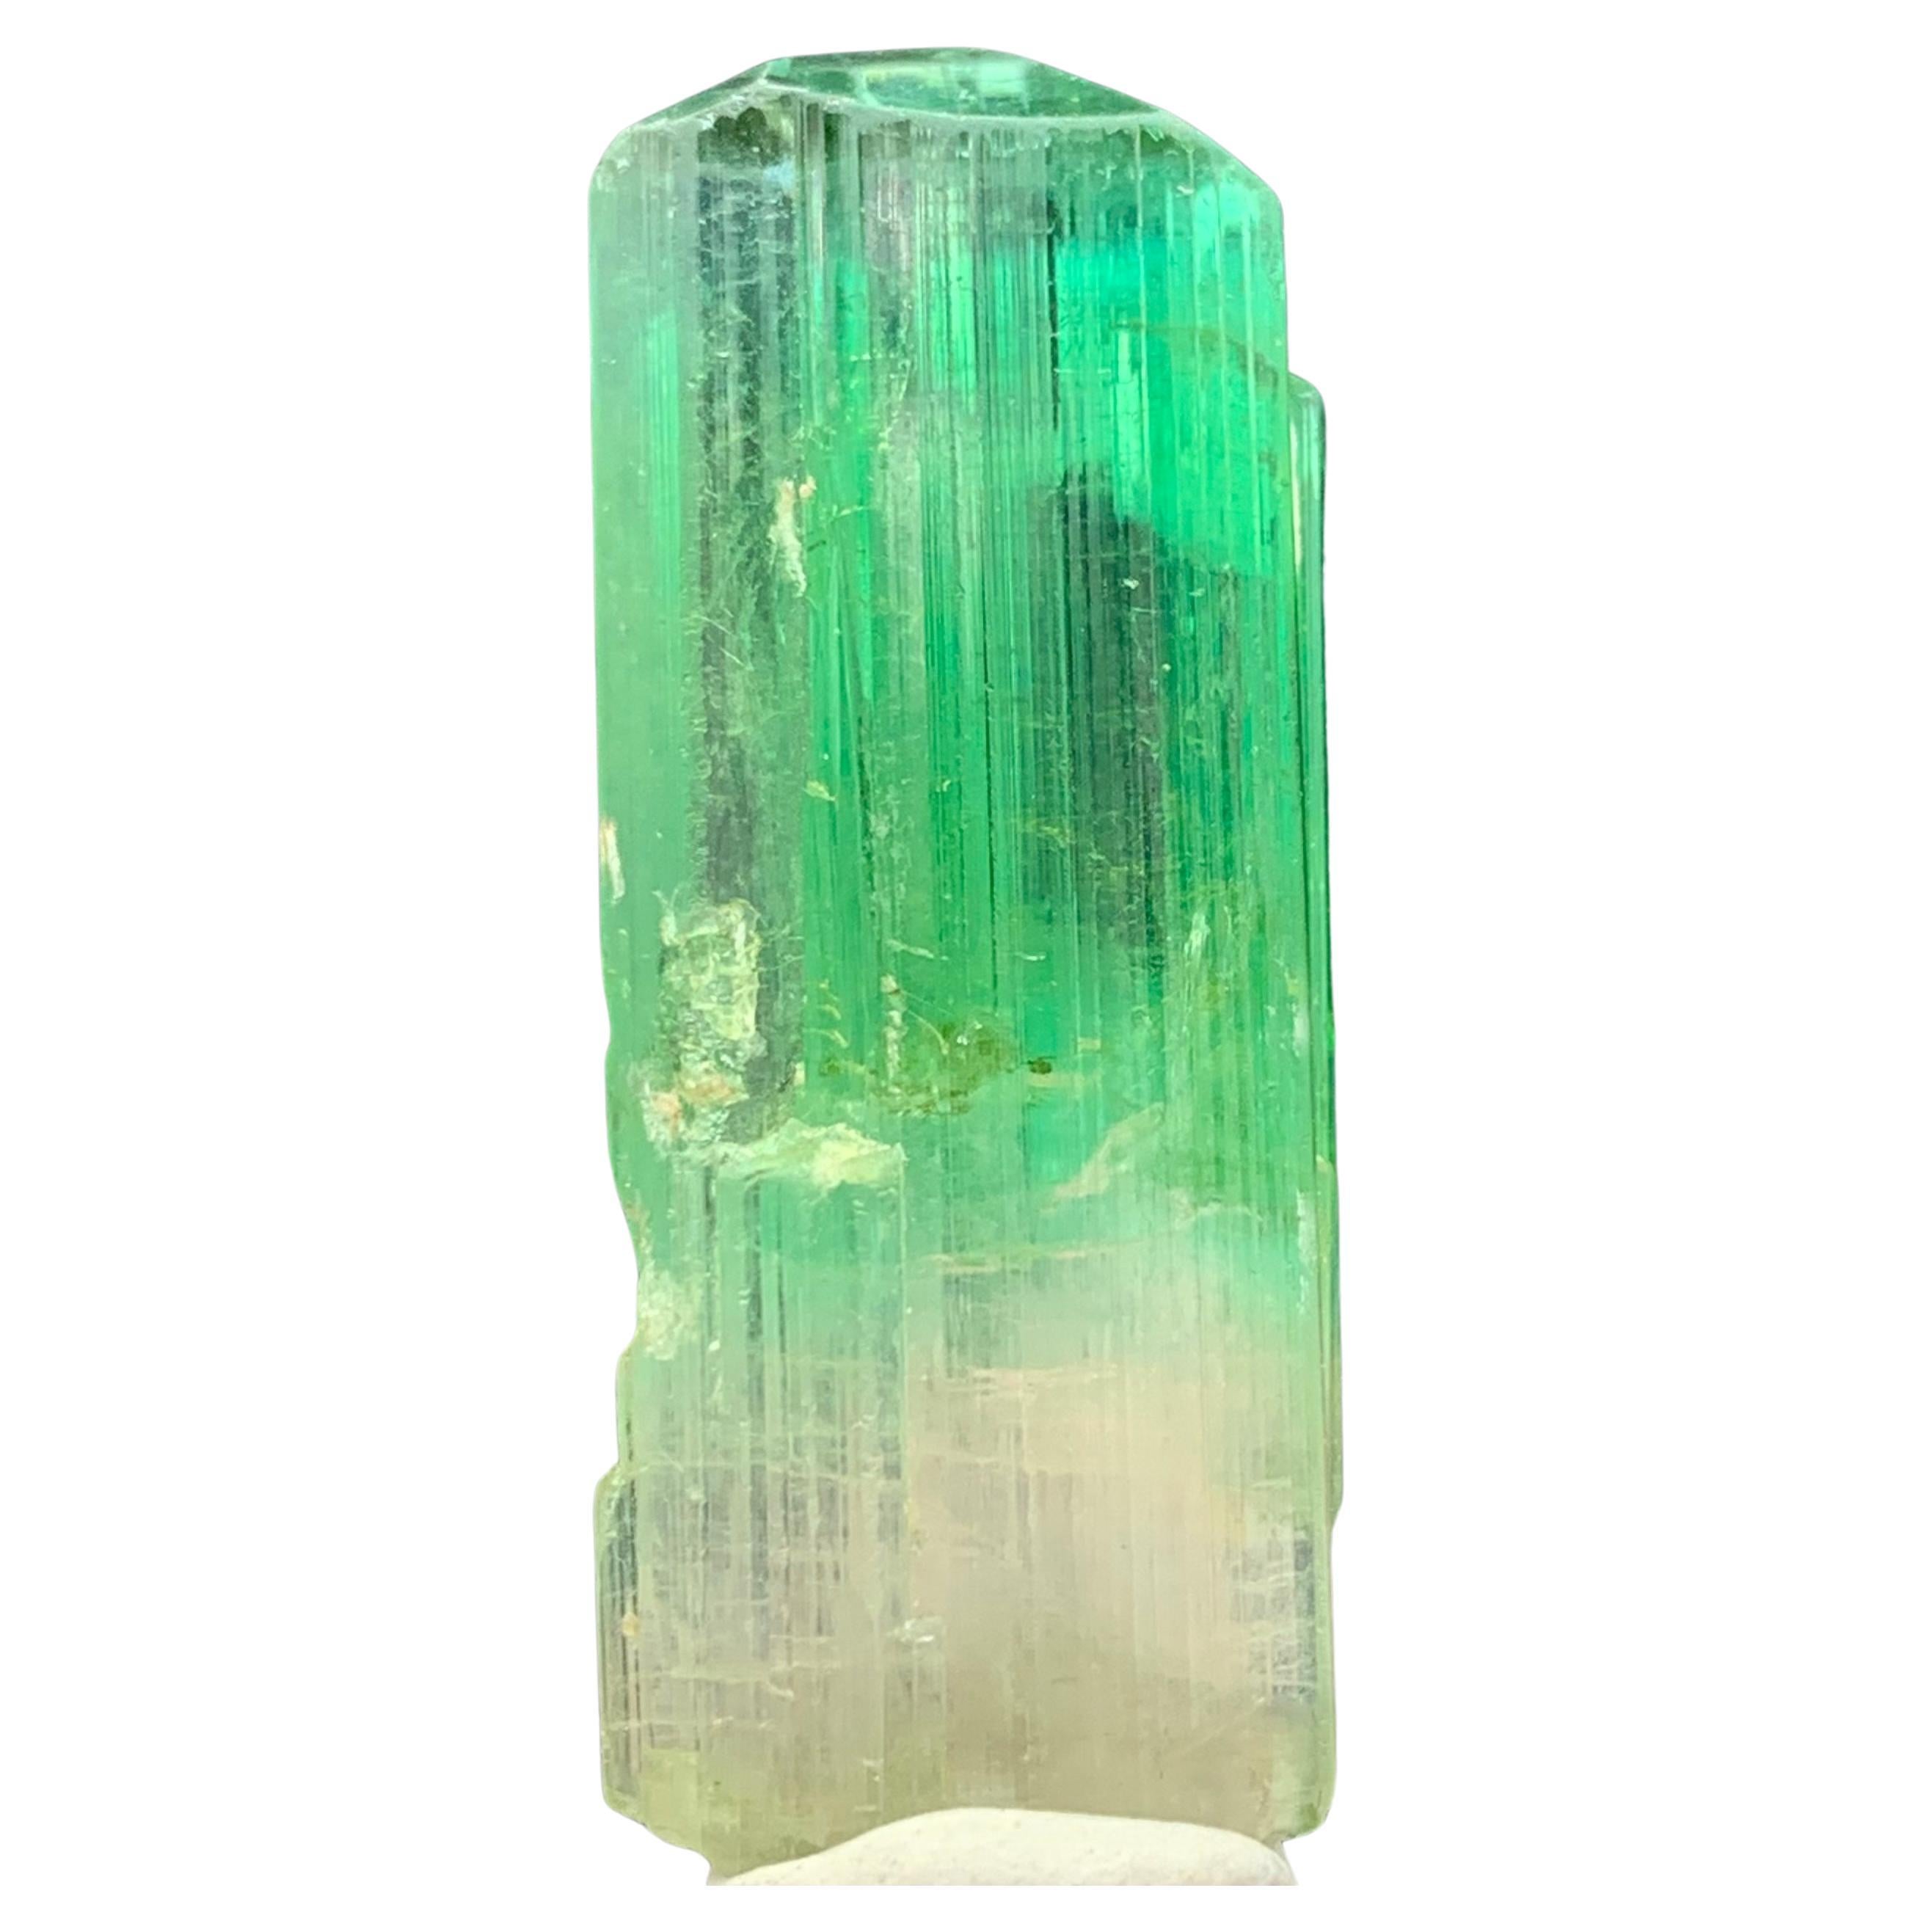 38.30 Carats Gorgeous Bi Color Tourmaline Crystal From Afghanistan 